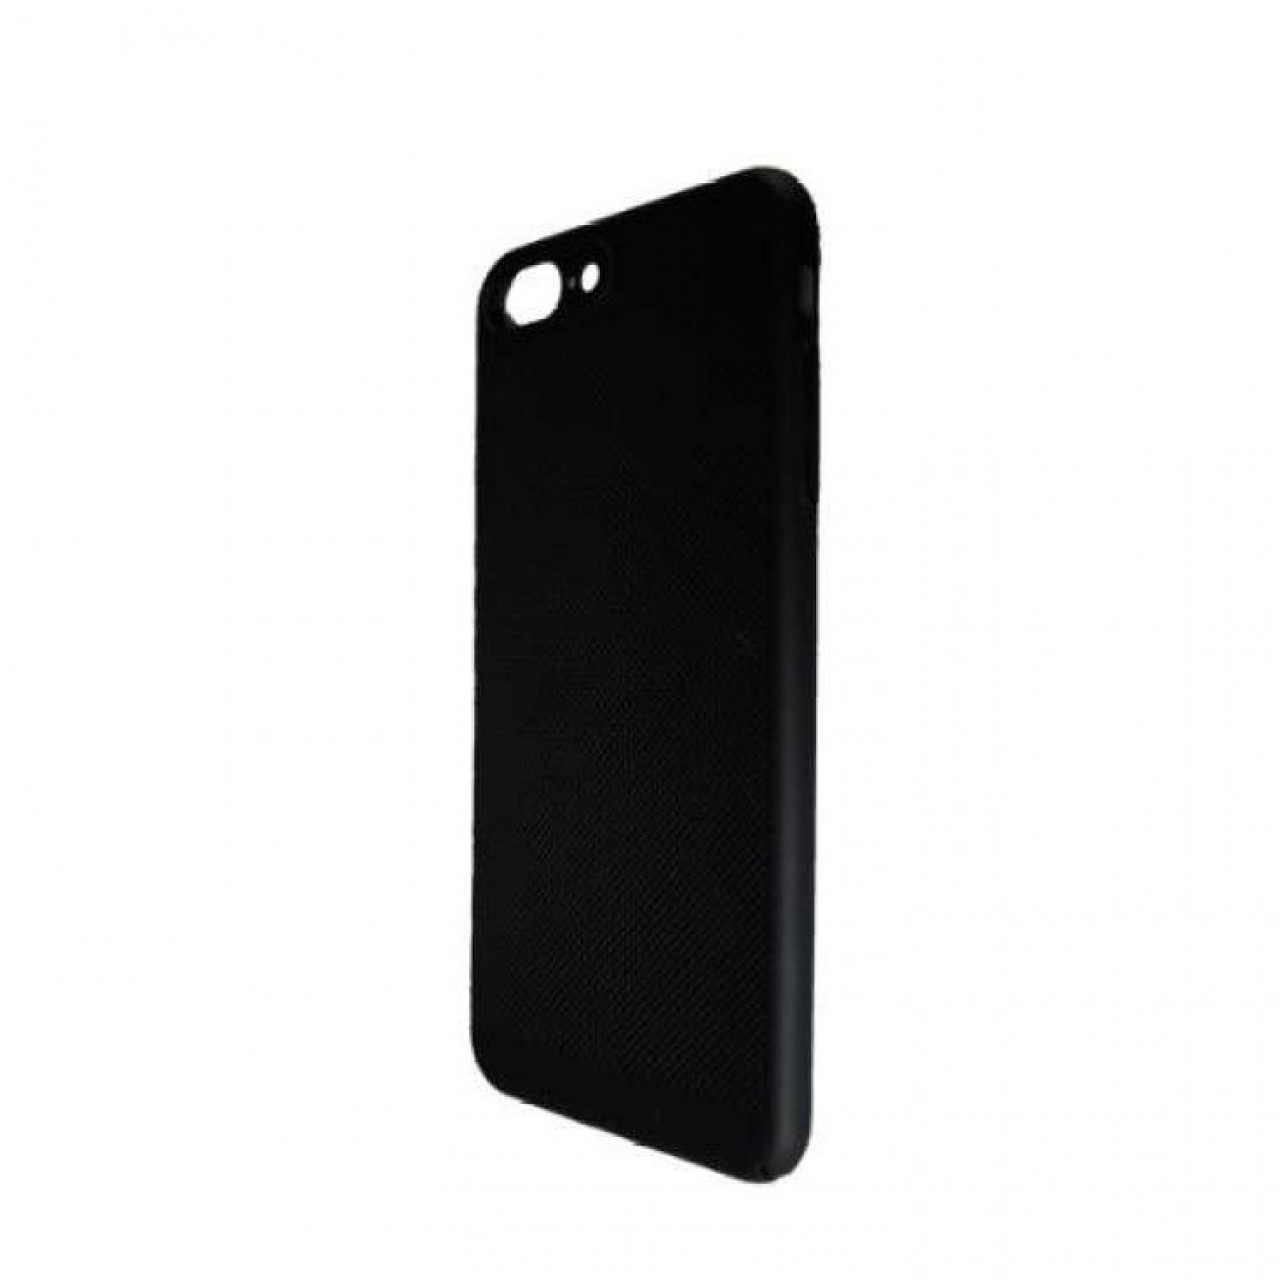 Black Grid phone Back Case for Iphone x, Iphone 7plus, Iphone7